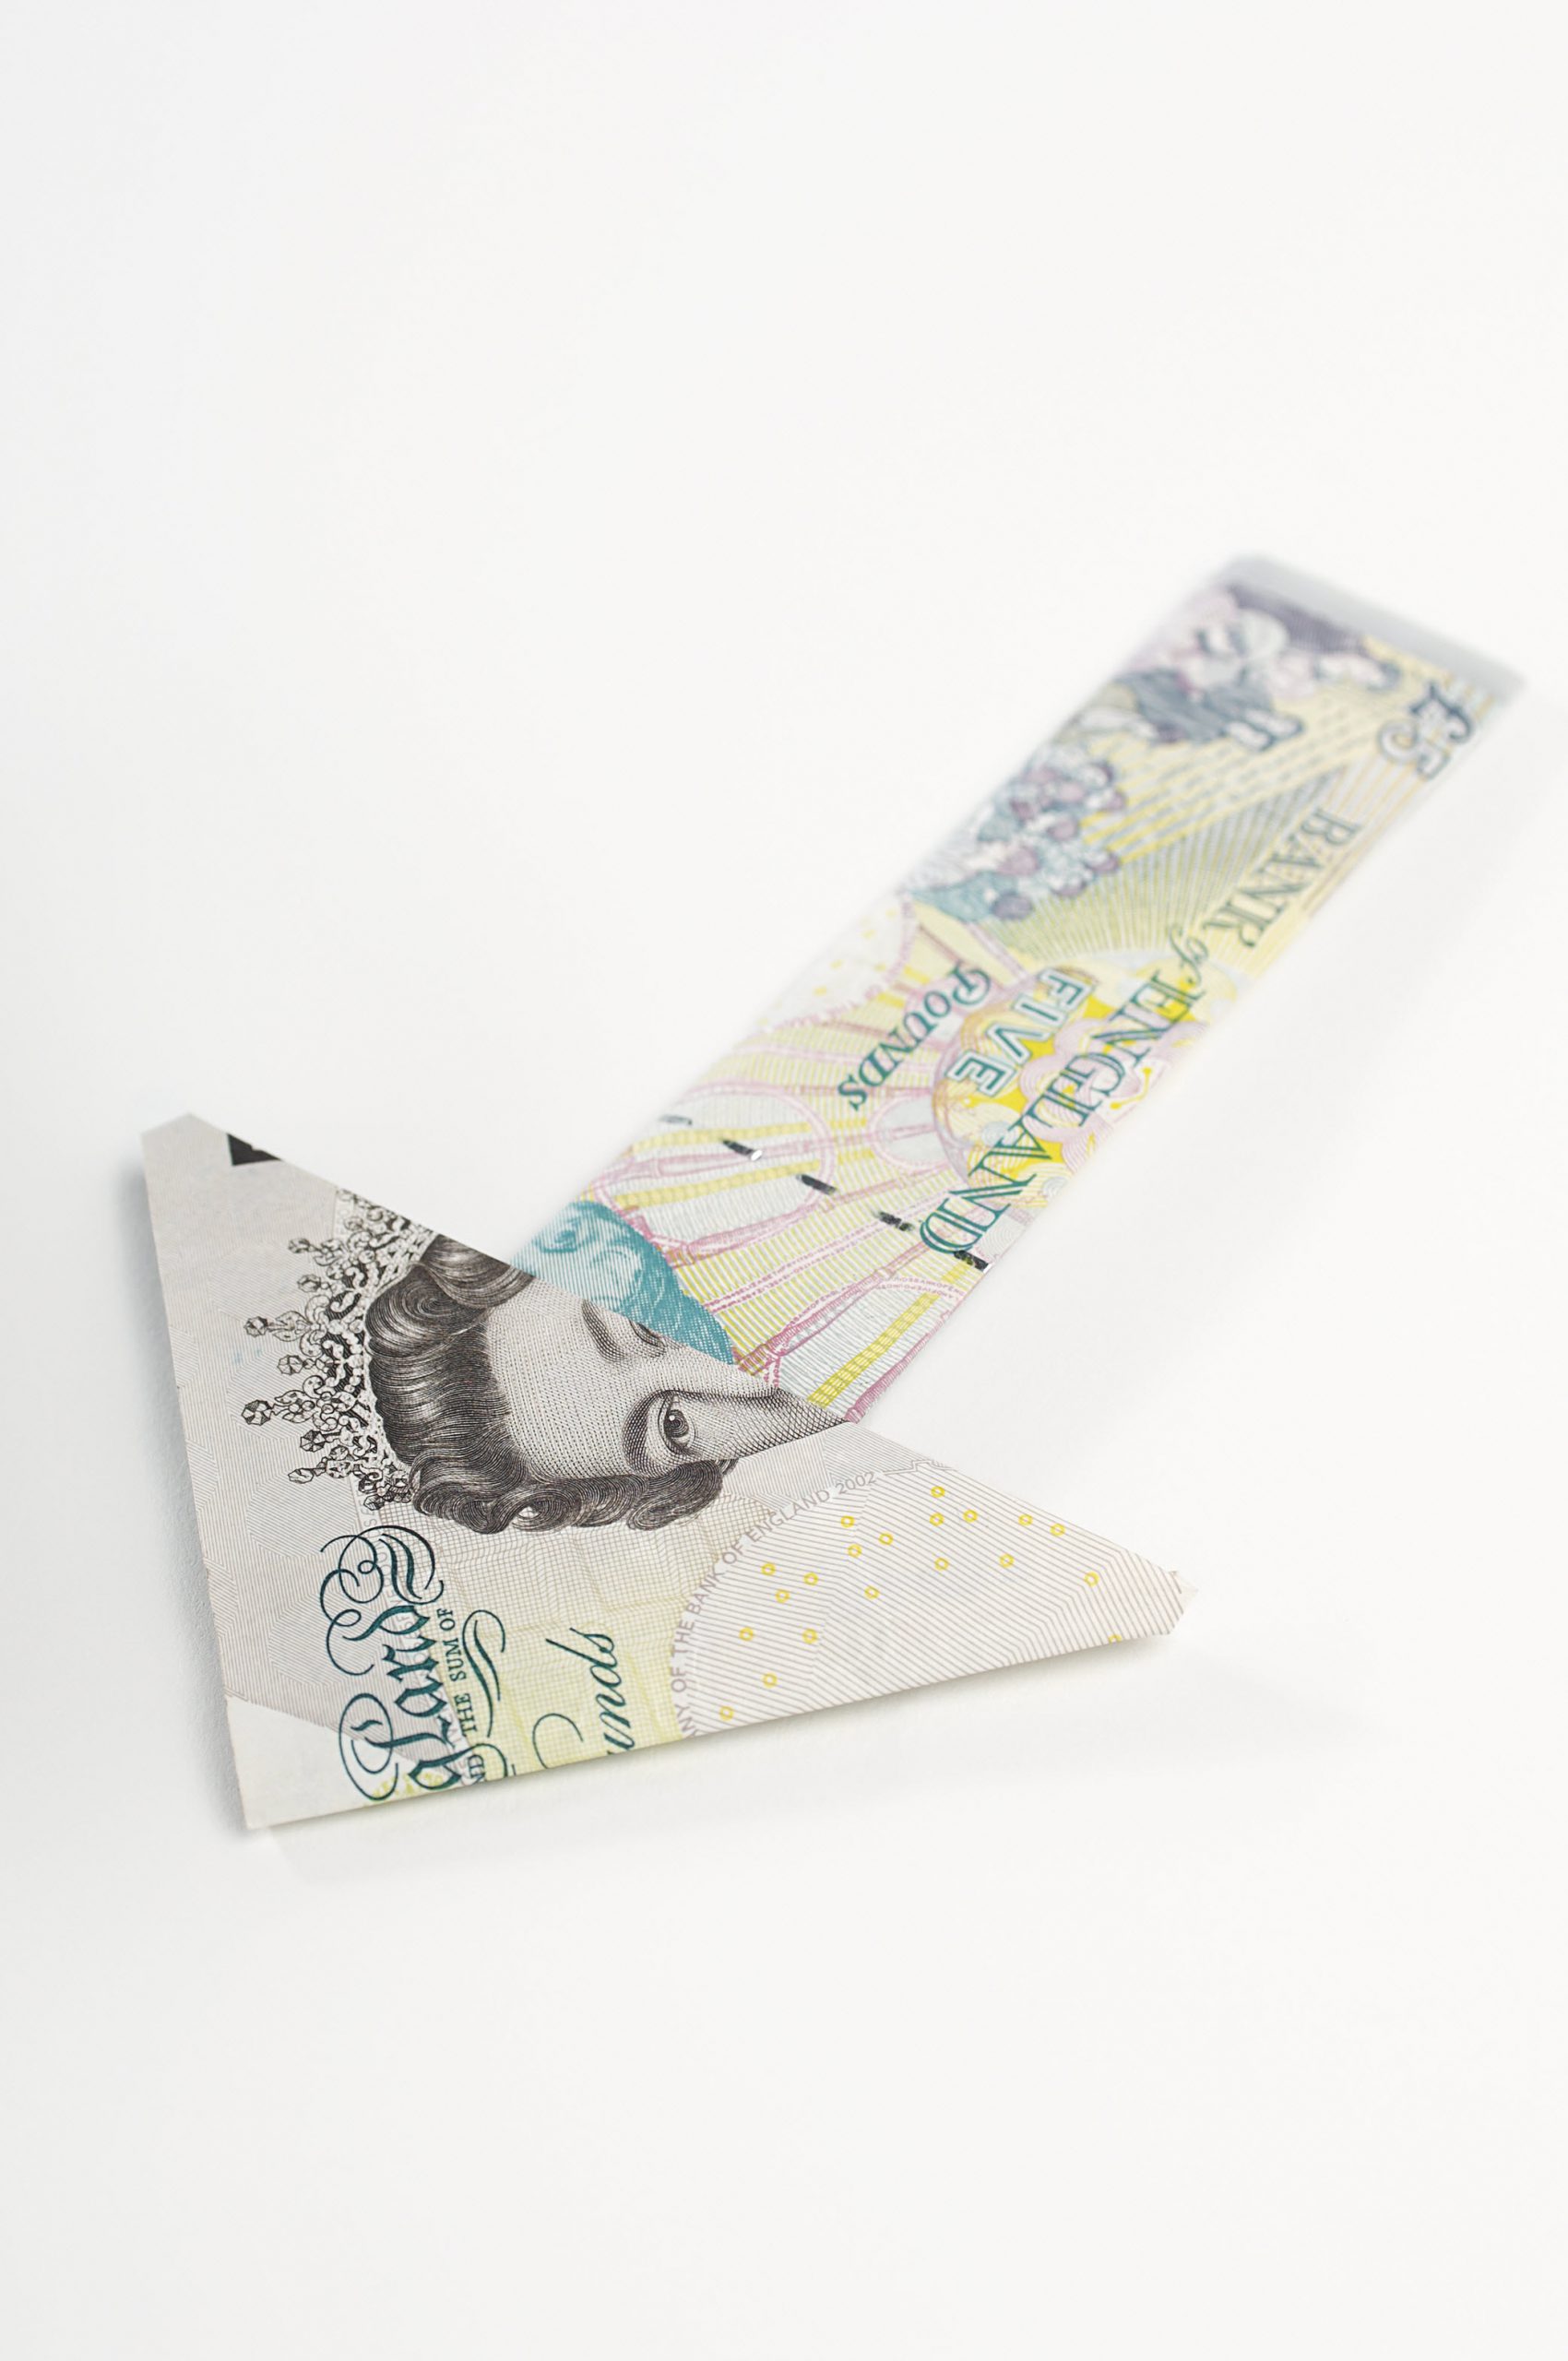 Arrow made of folded banknotes